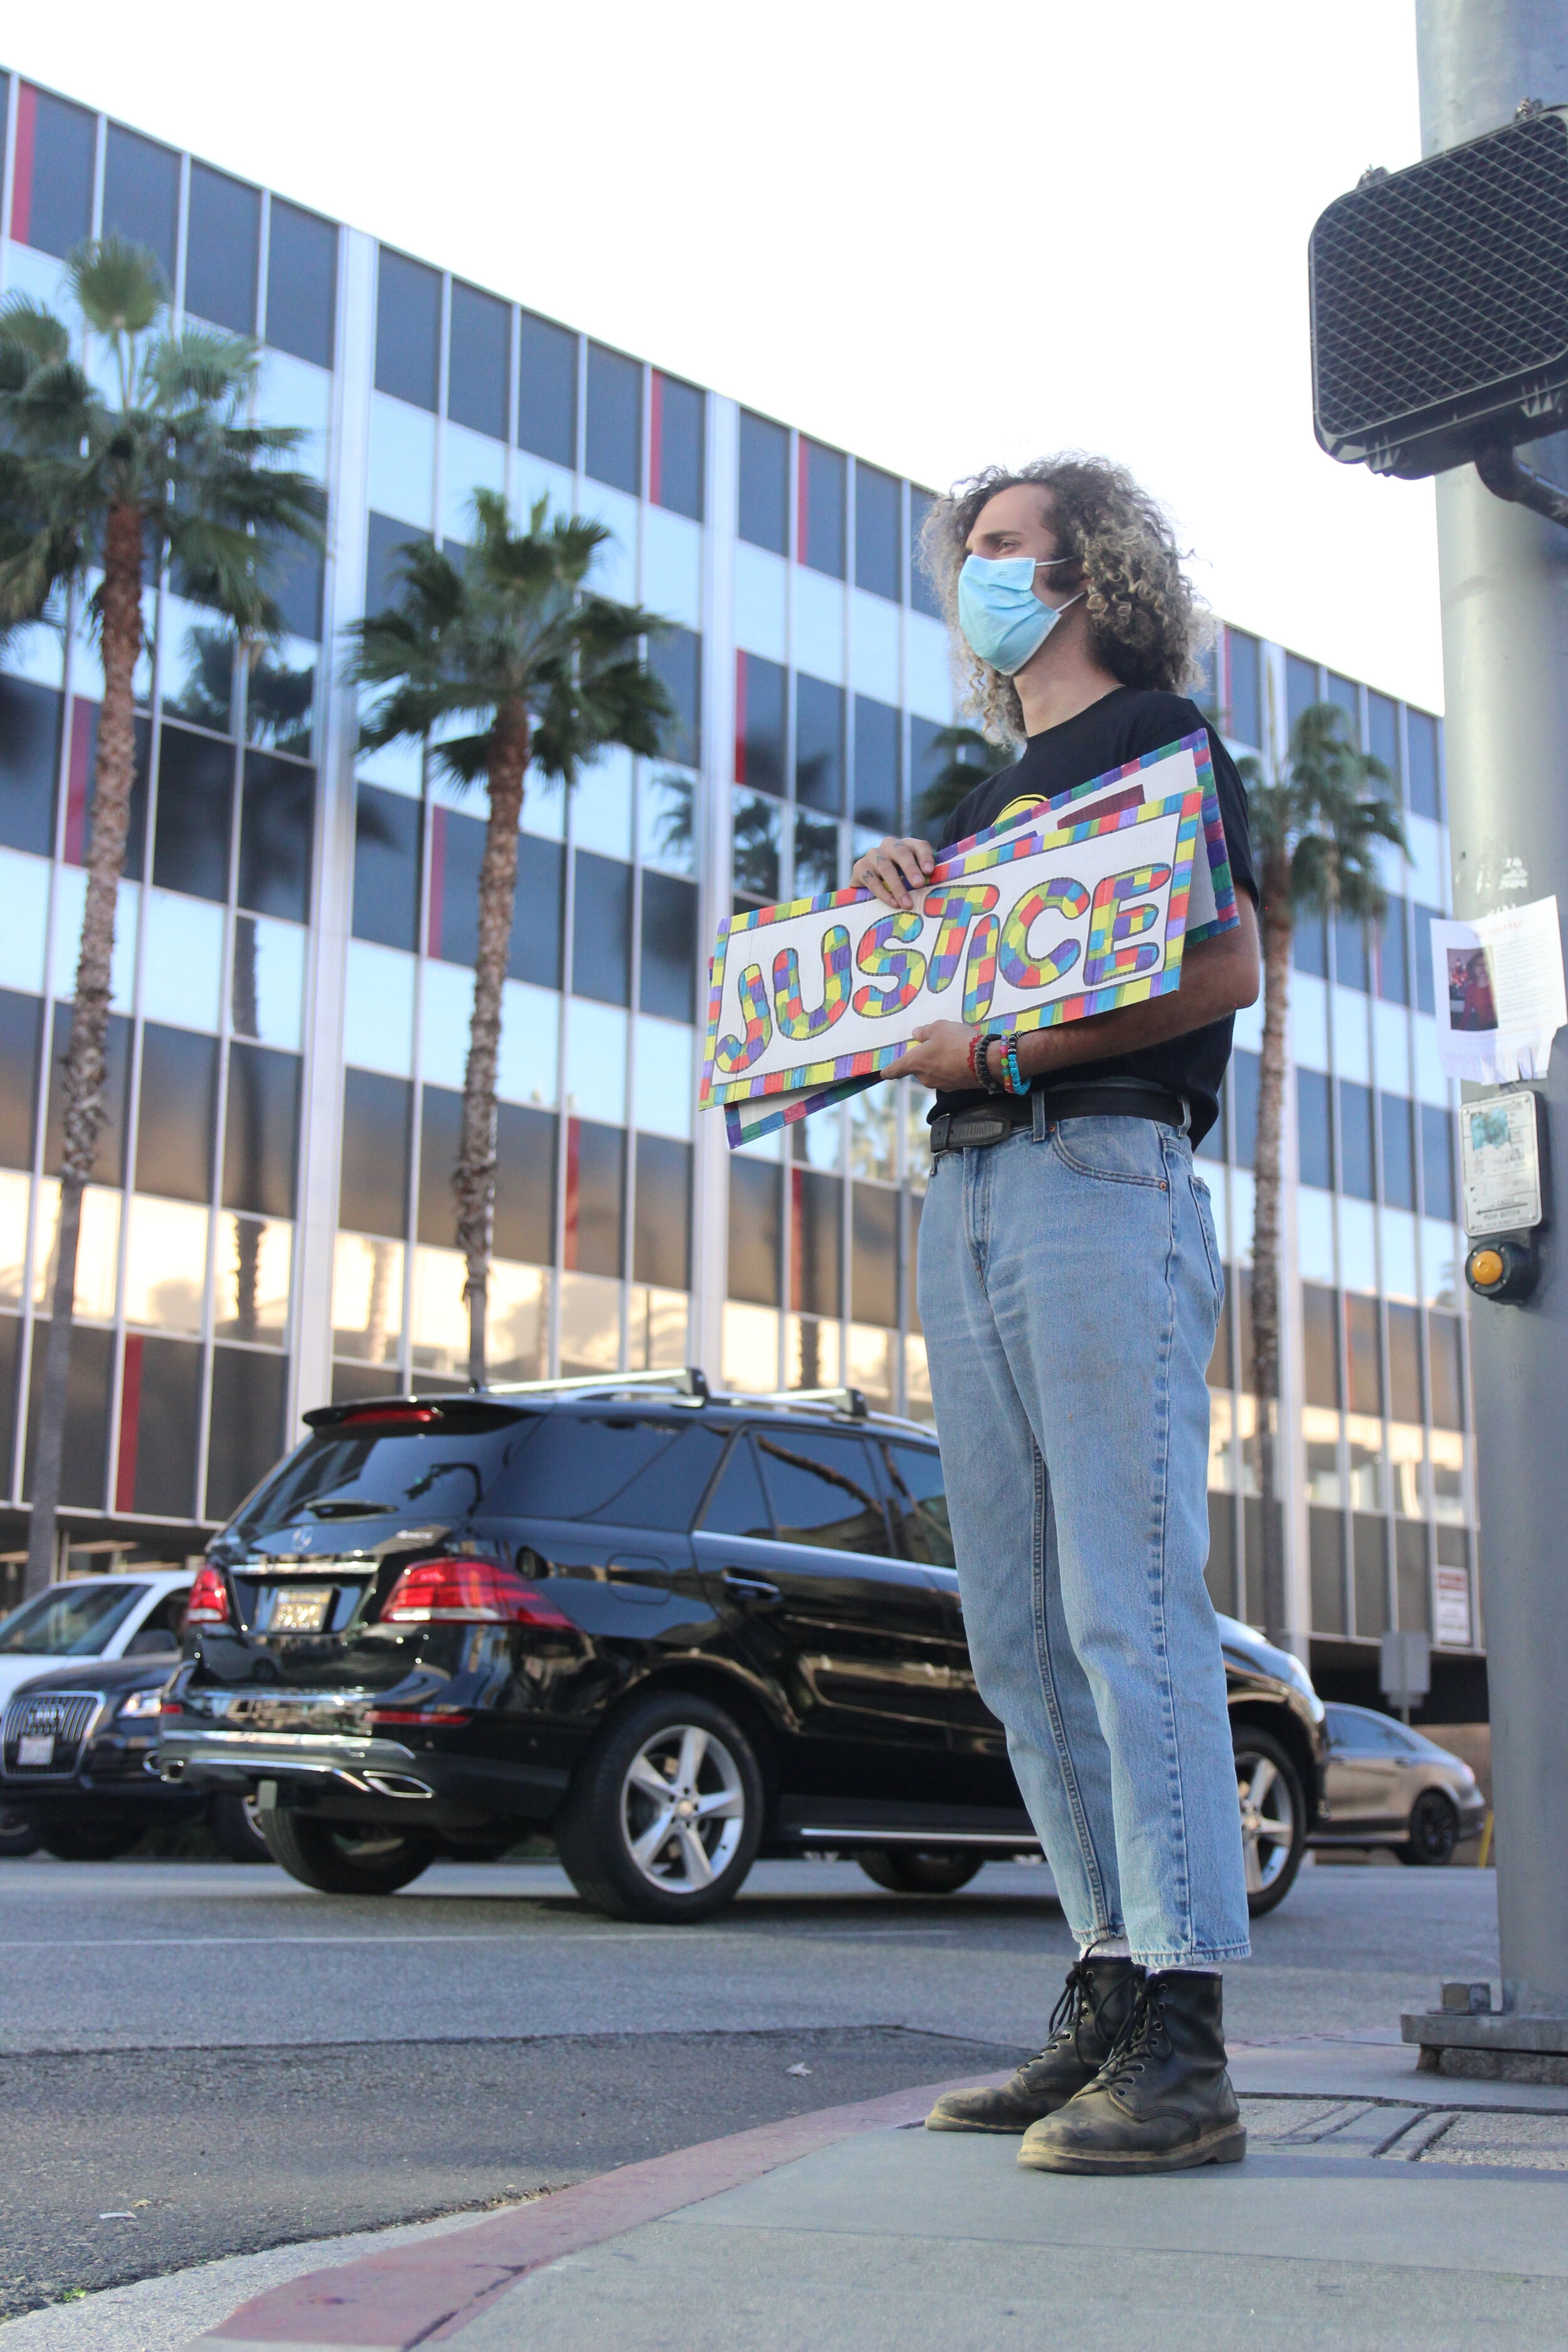   Charlie Anastasis felt protesting with Valley of Change was the least he could do for his community. It gave him a new perspective of the city he lives in, “Not everyone is on the same page in this town.” Sherman Oaks, Calif. Nov. 2, 2020. (Carolyn